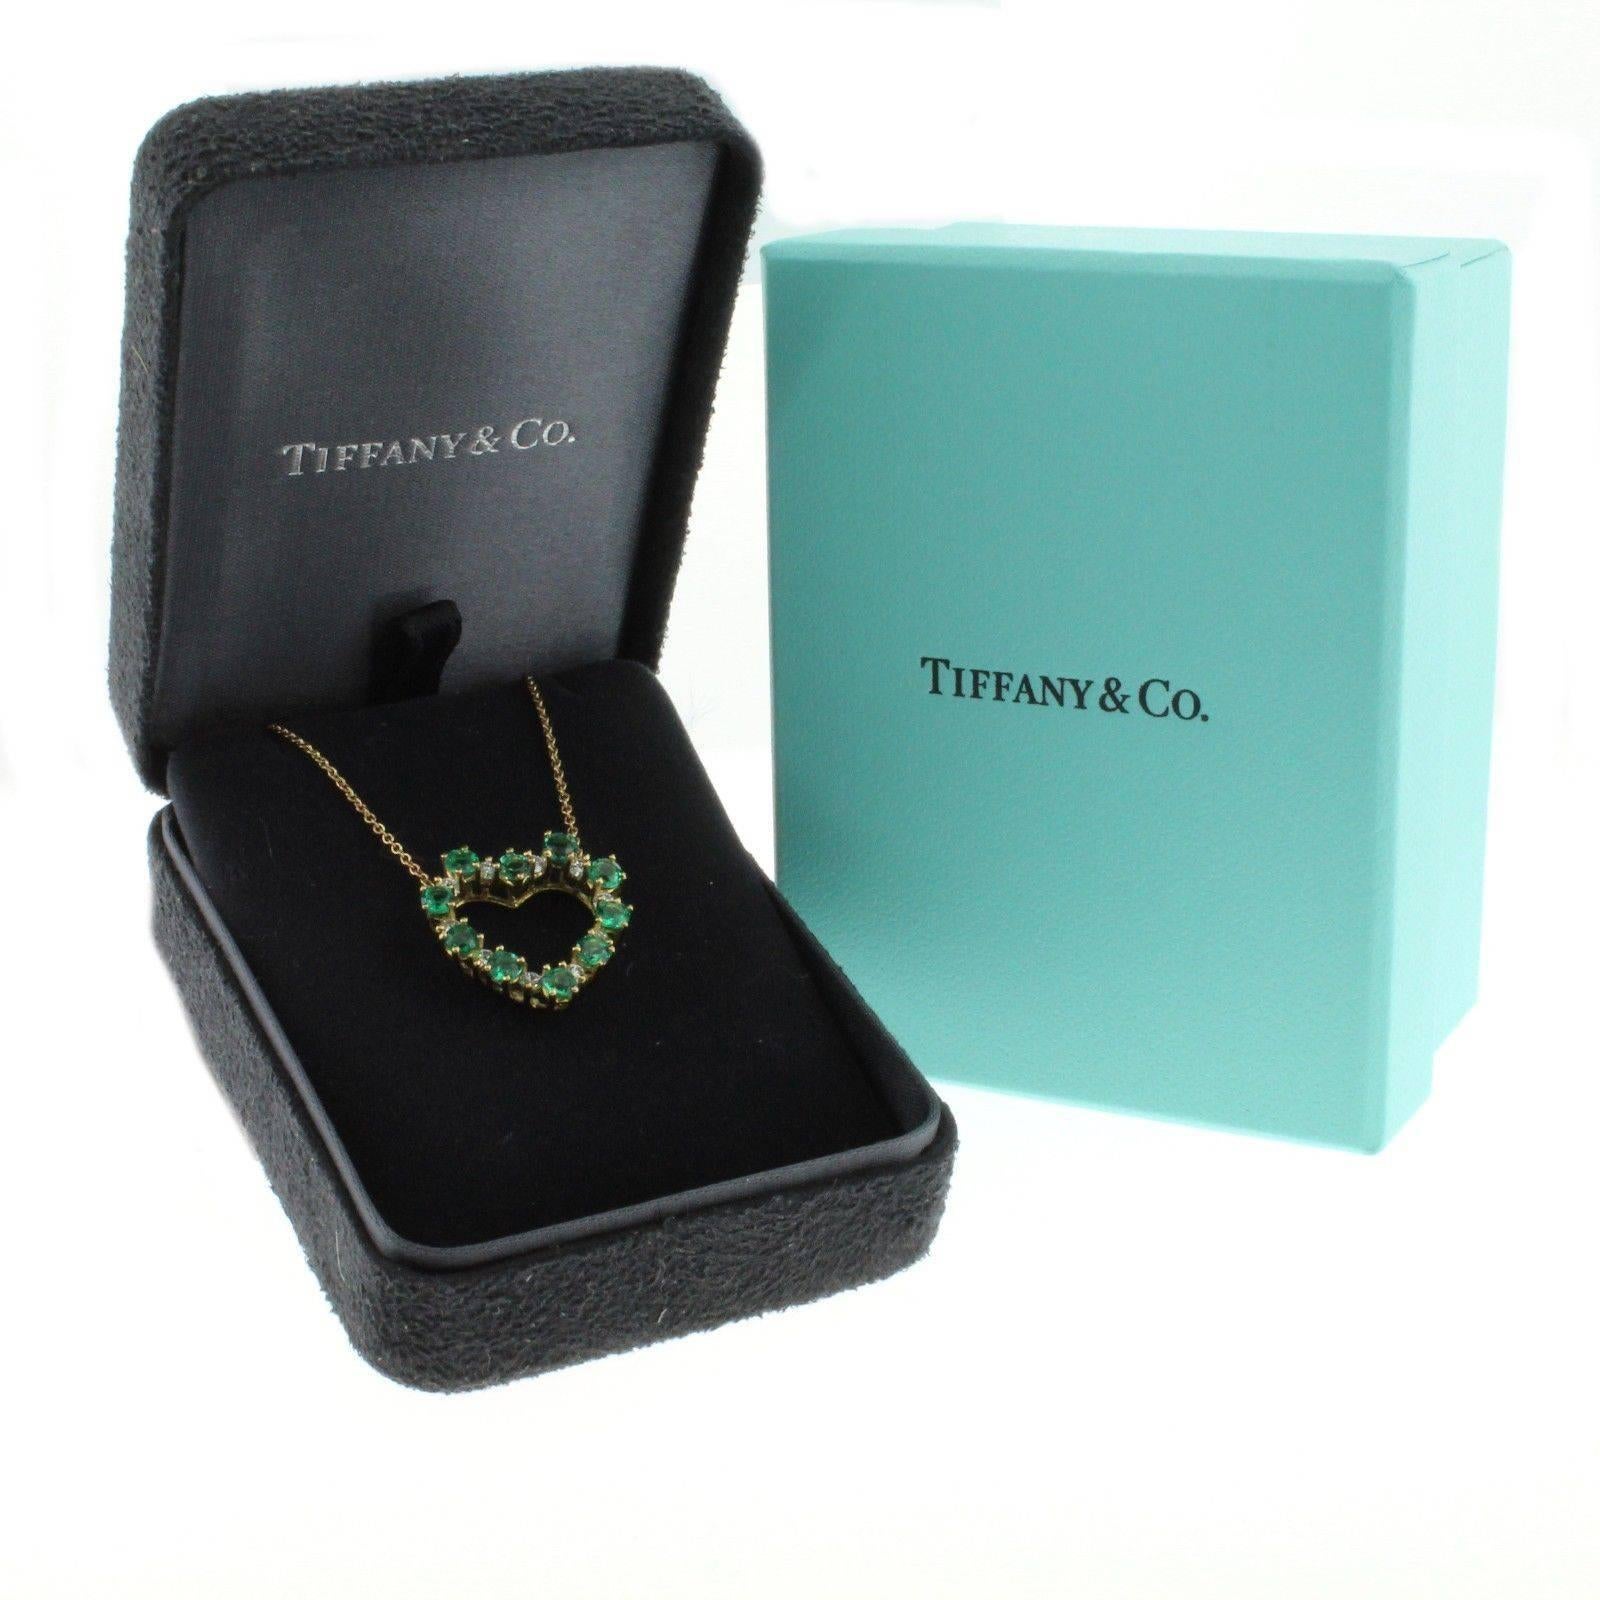 18kt gold emerald and diamond Tiffany heart pendant comprised of  ten round emeralds weighing 1 carats and 10 round diamond weighing .30cts, 16 inch necklace